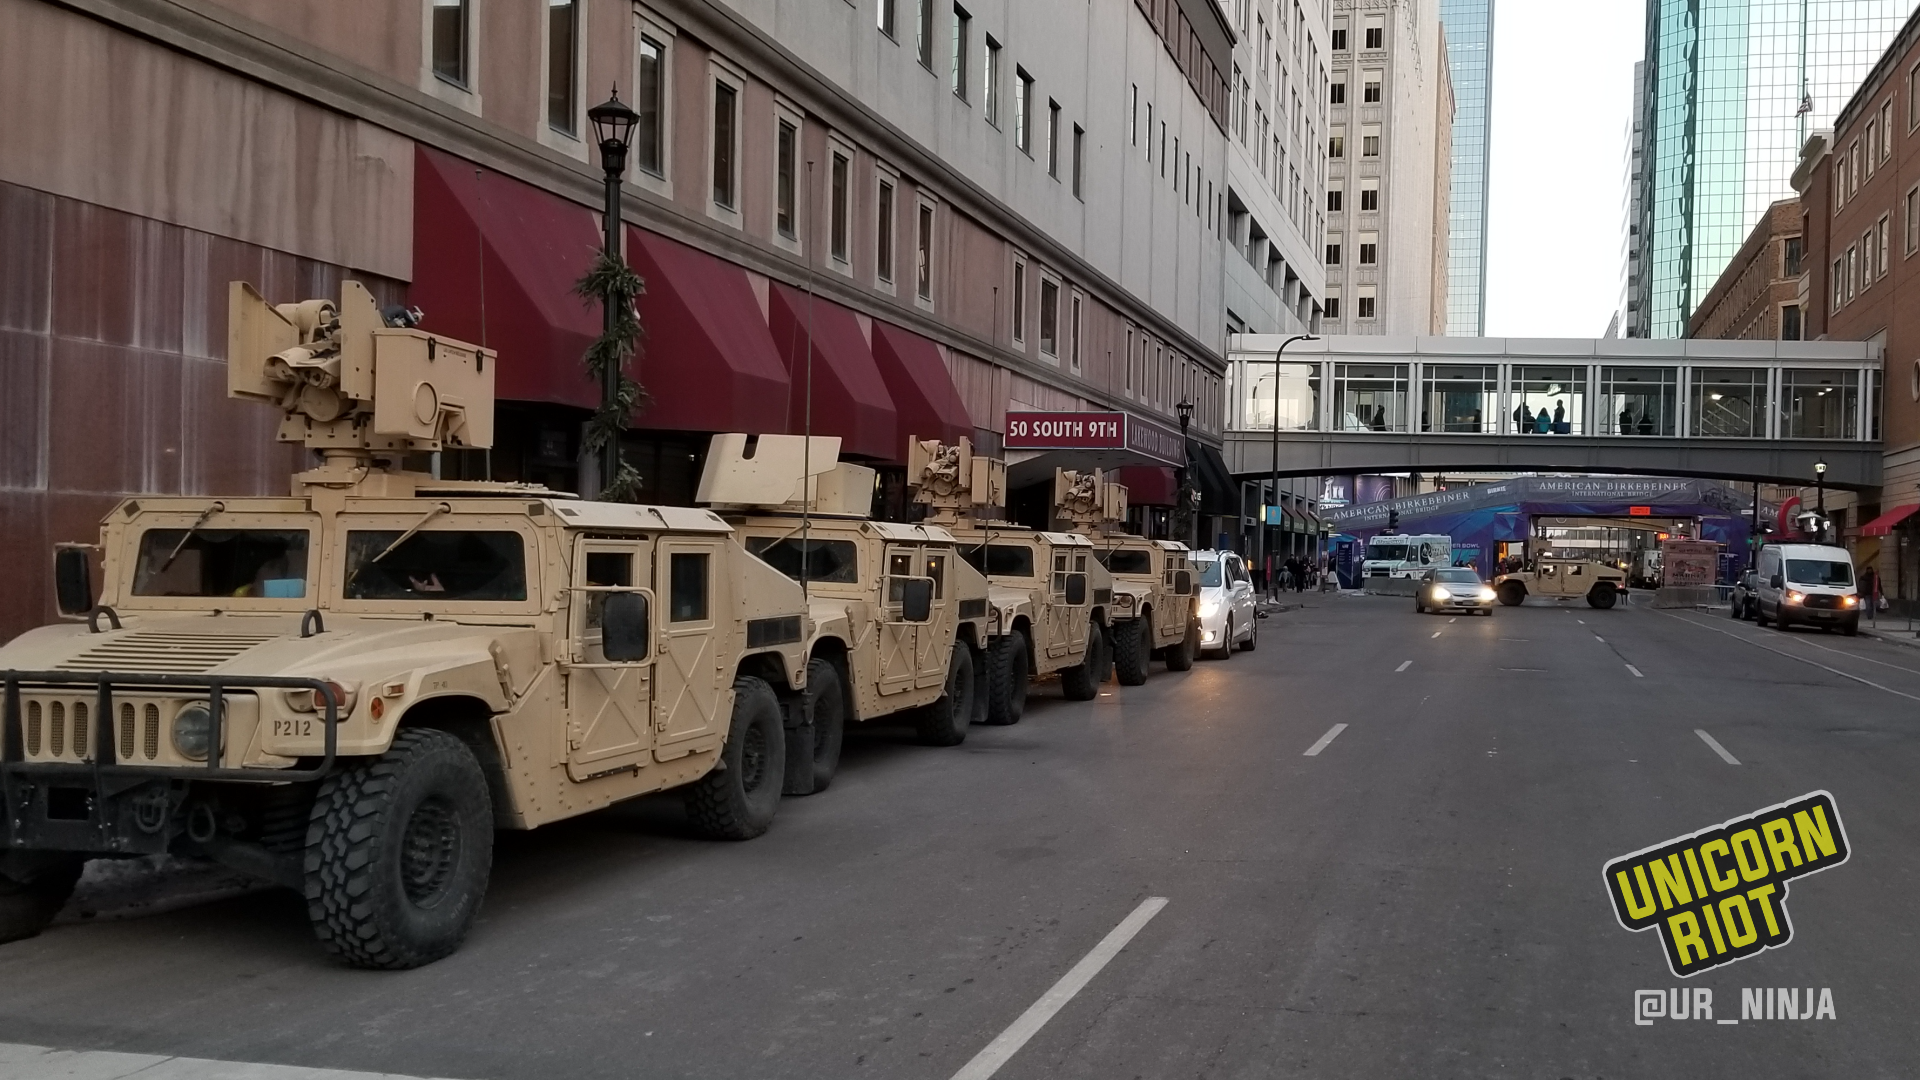 Humvees operated by the National Guard